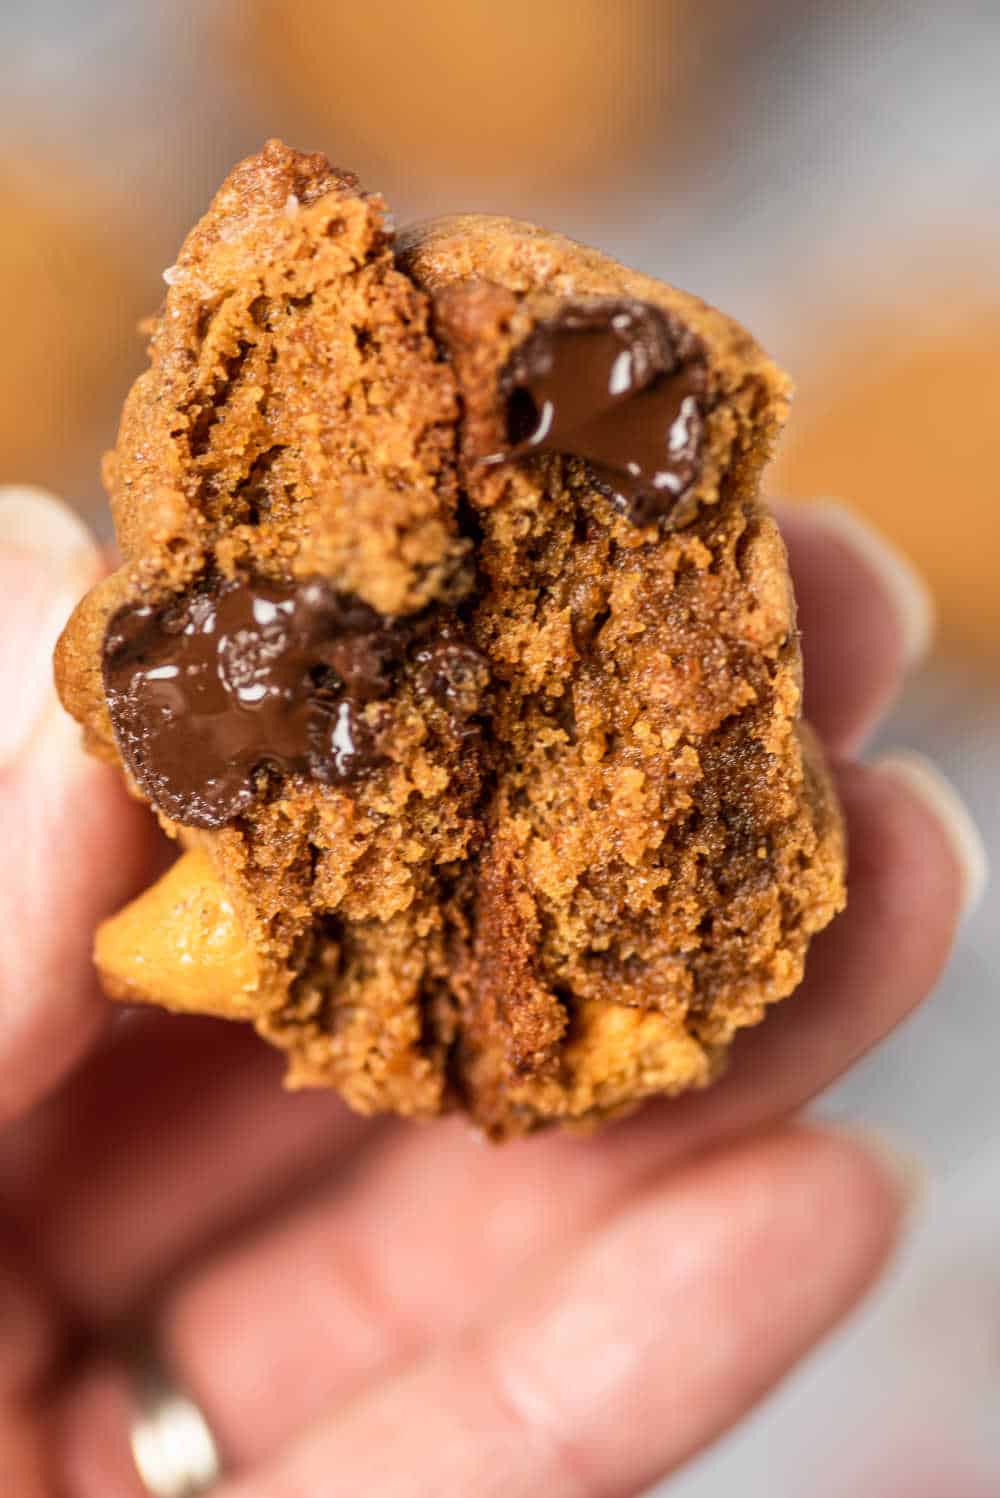 A hand holding a chocolate chip pudding cookie with a bite out of it.